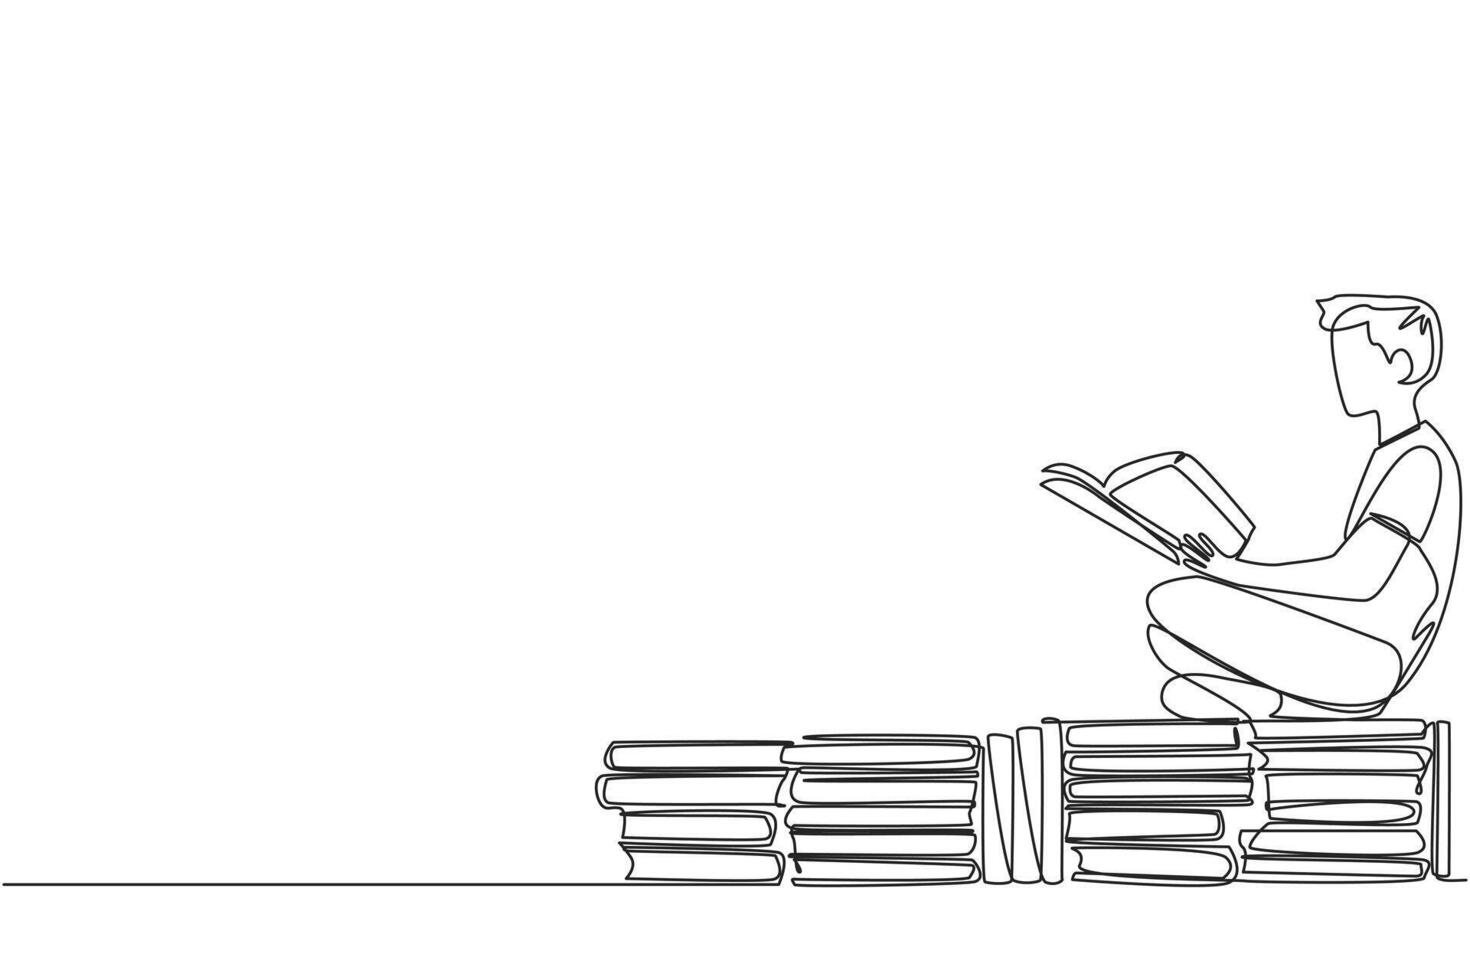 Single one line drawing man sitting relaxed reading a book on pile of books. Relax while reading fiction books. Enjoy the storyline. Book festival concept. Continuous line design graphic illustration vector